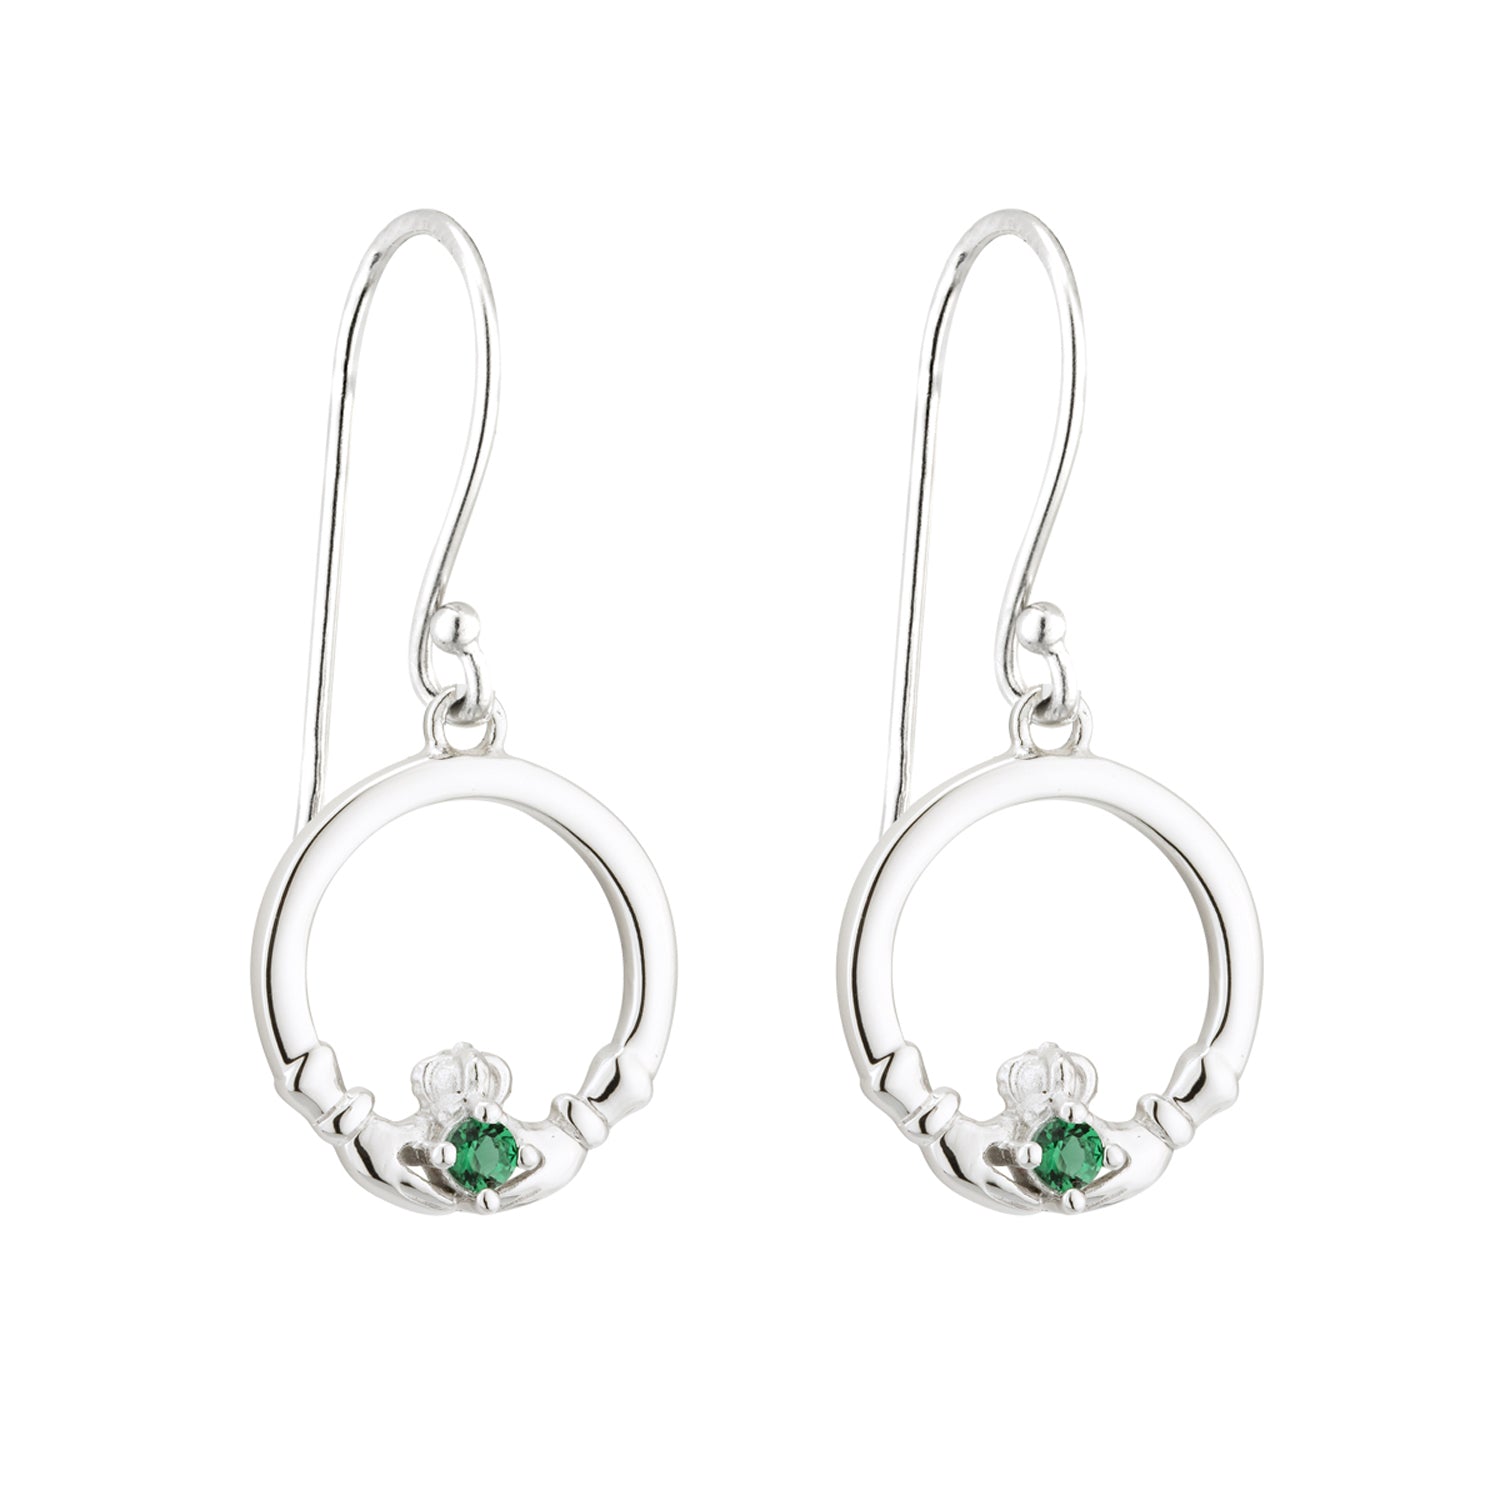 Sterling Silver Claddagh Drop Earrings with Emerald Stone Hearts